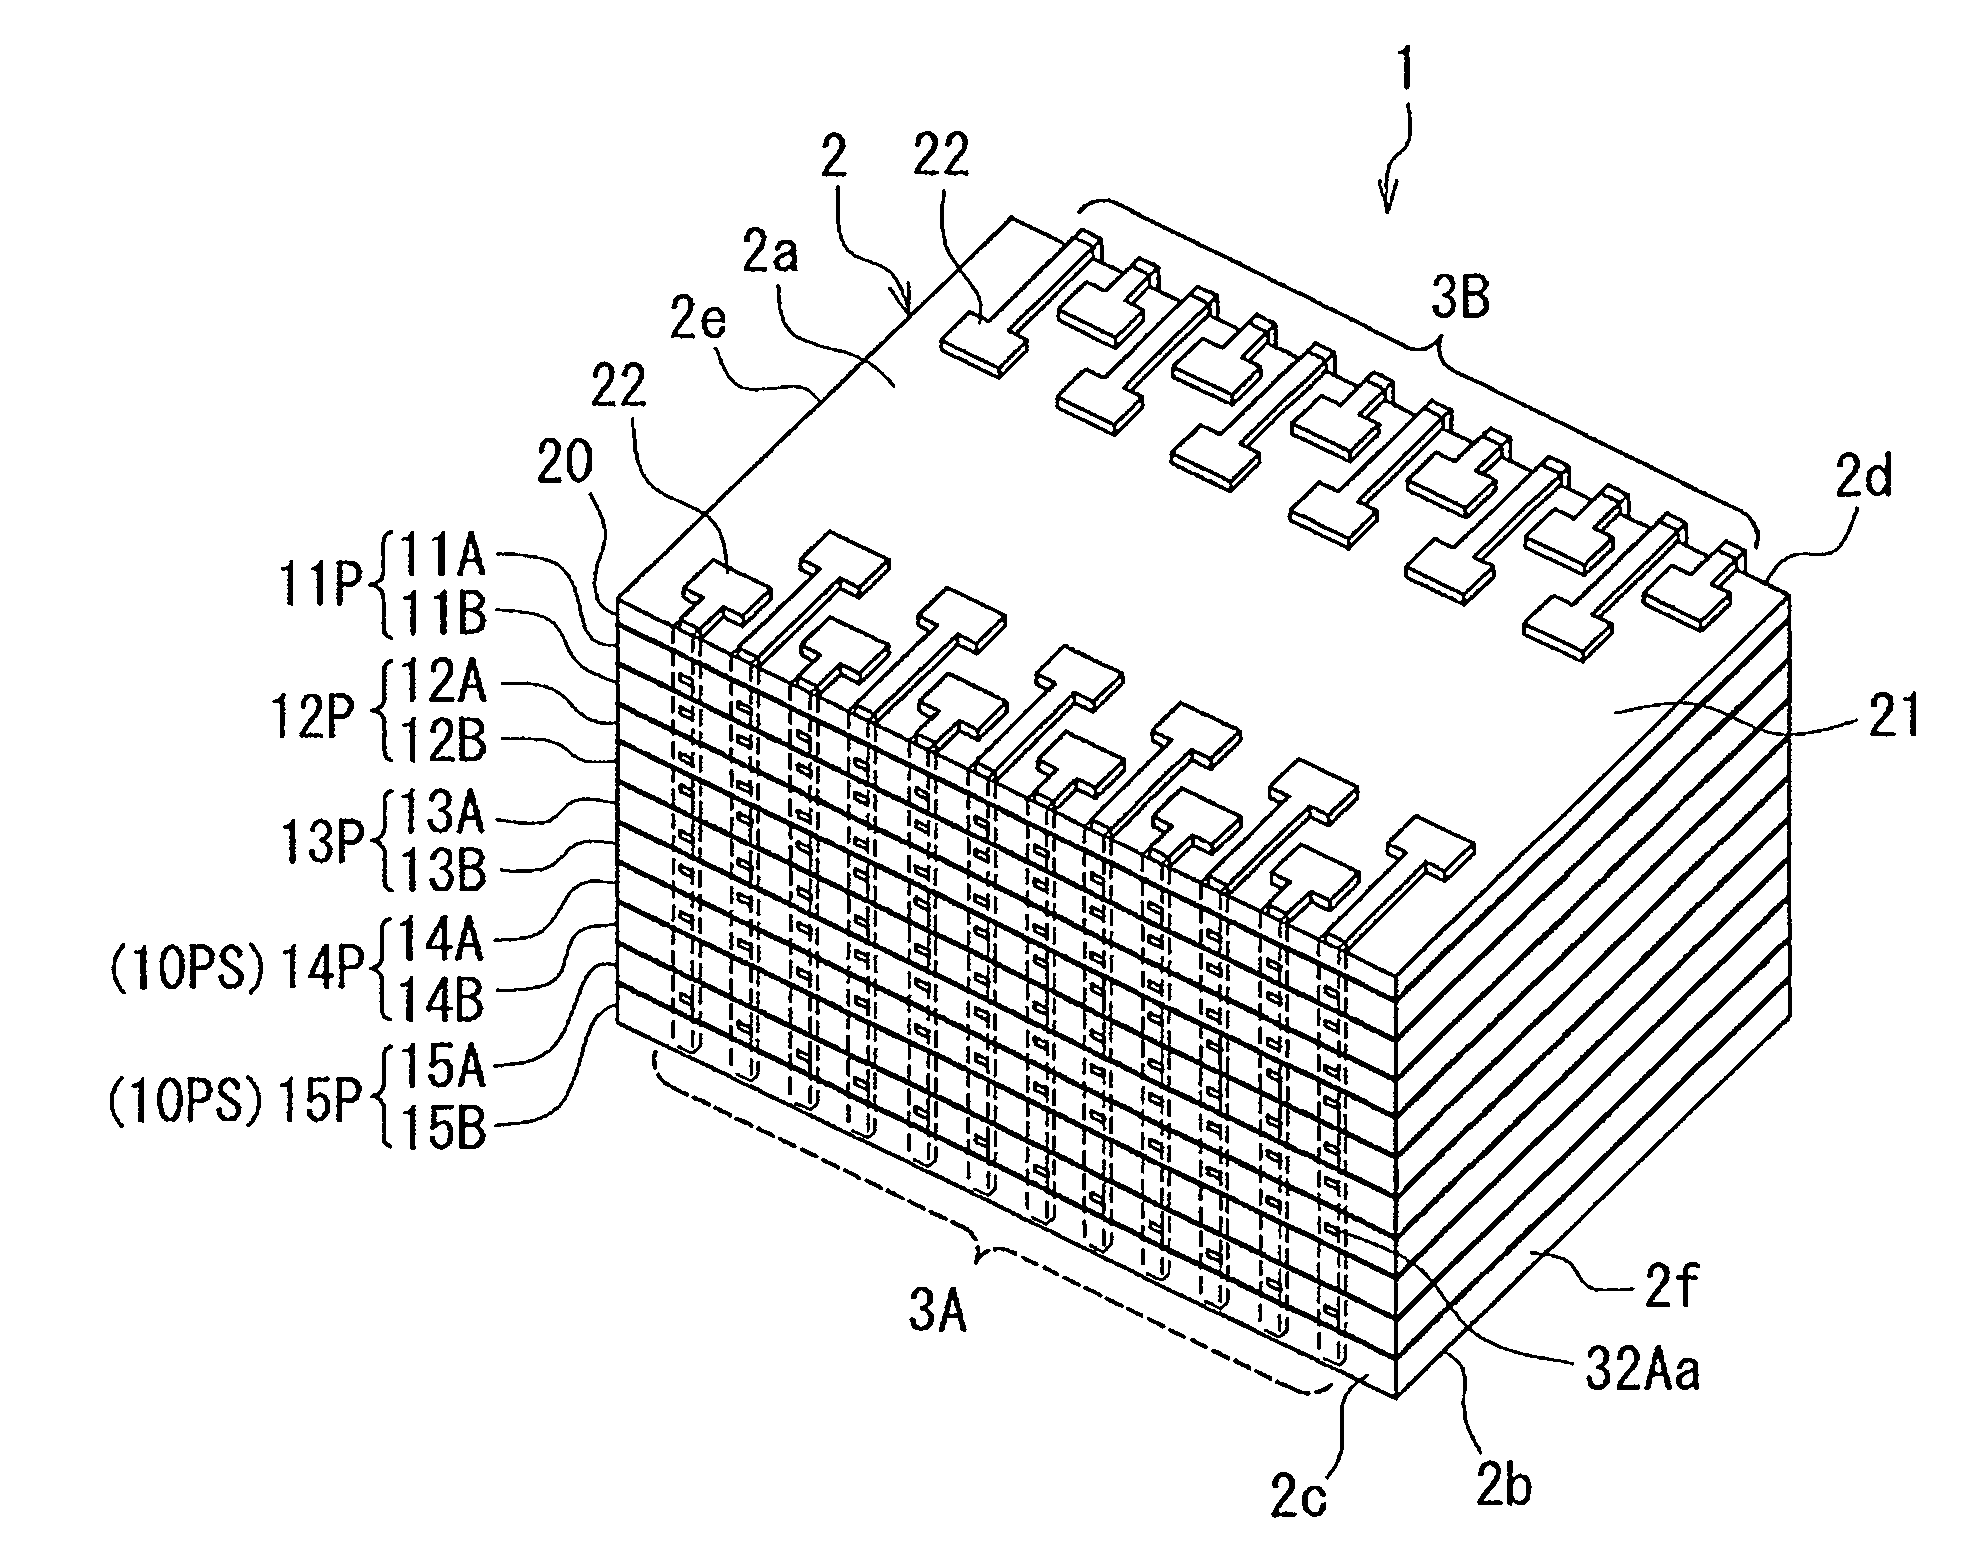 Layered chip package with wiring on the side surfaces